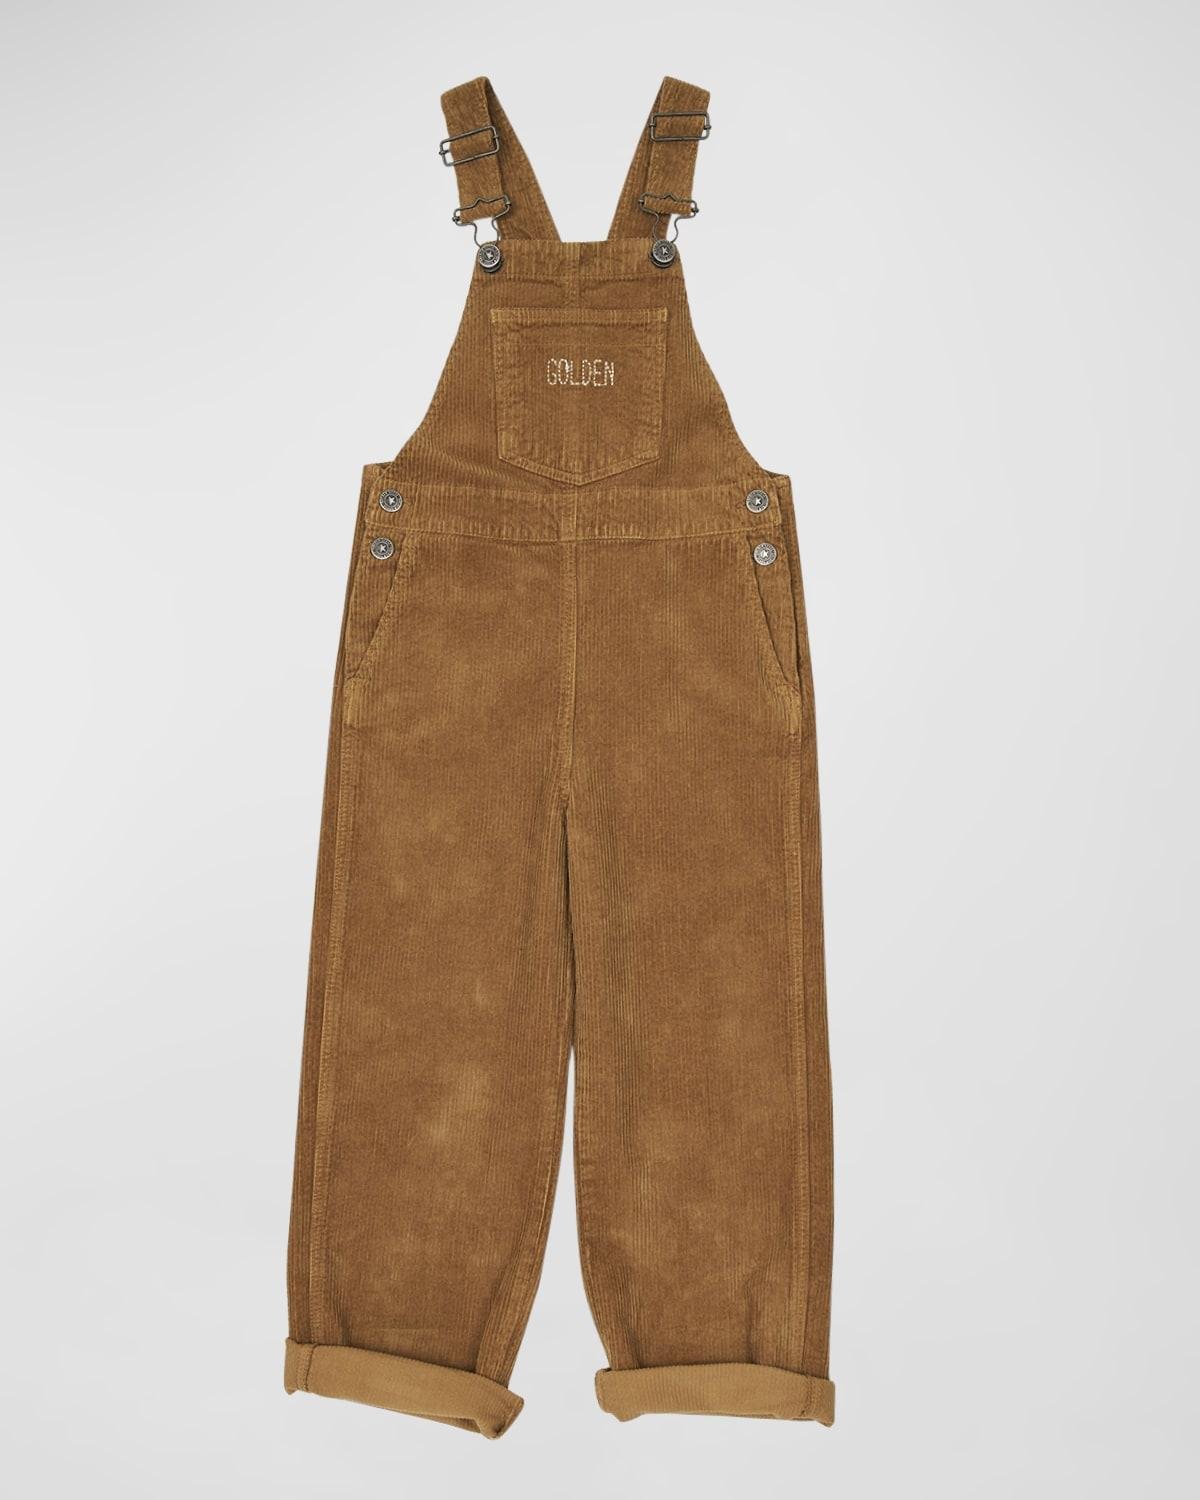 Girl's Embroidered Cotton-Corduroy Overalls by GOLDEN GOOSE